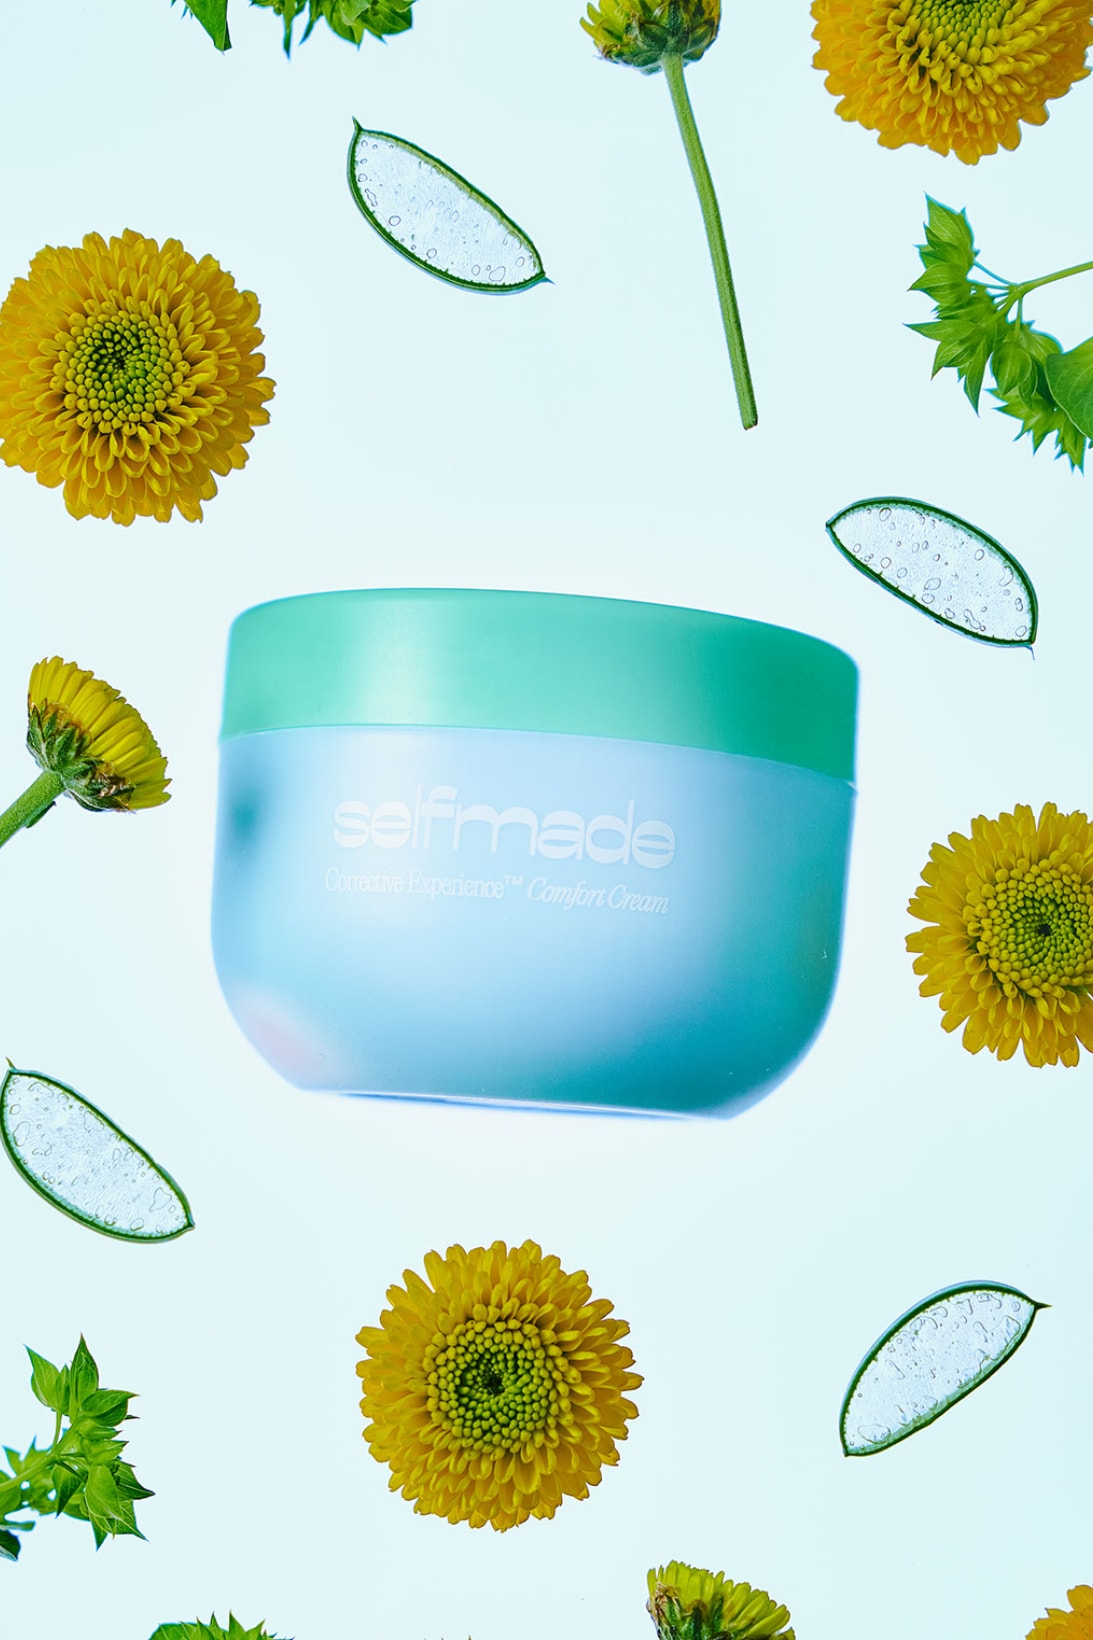 selfmade Corrective Experience Comfort Cream release